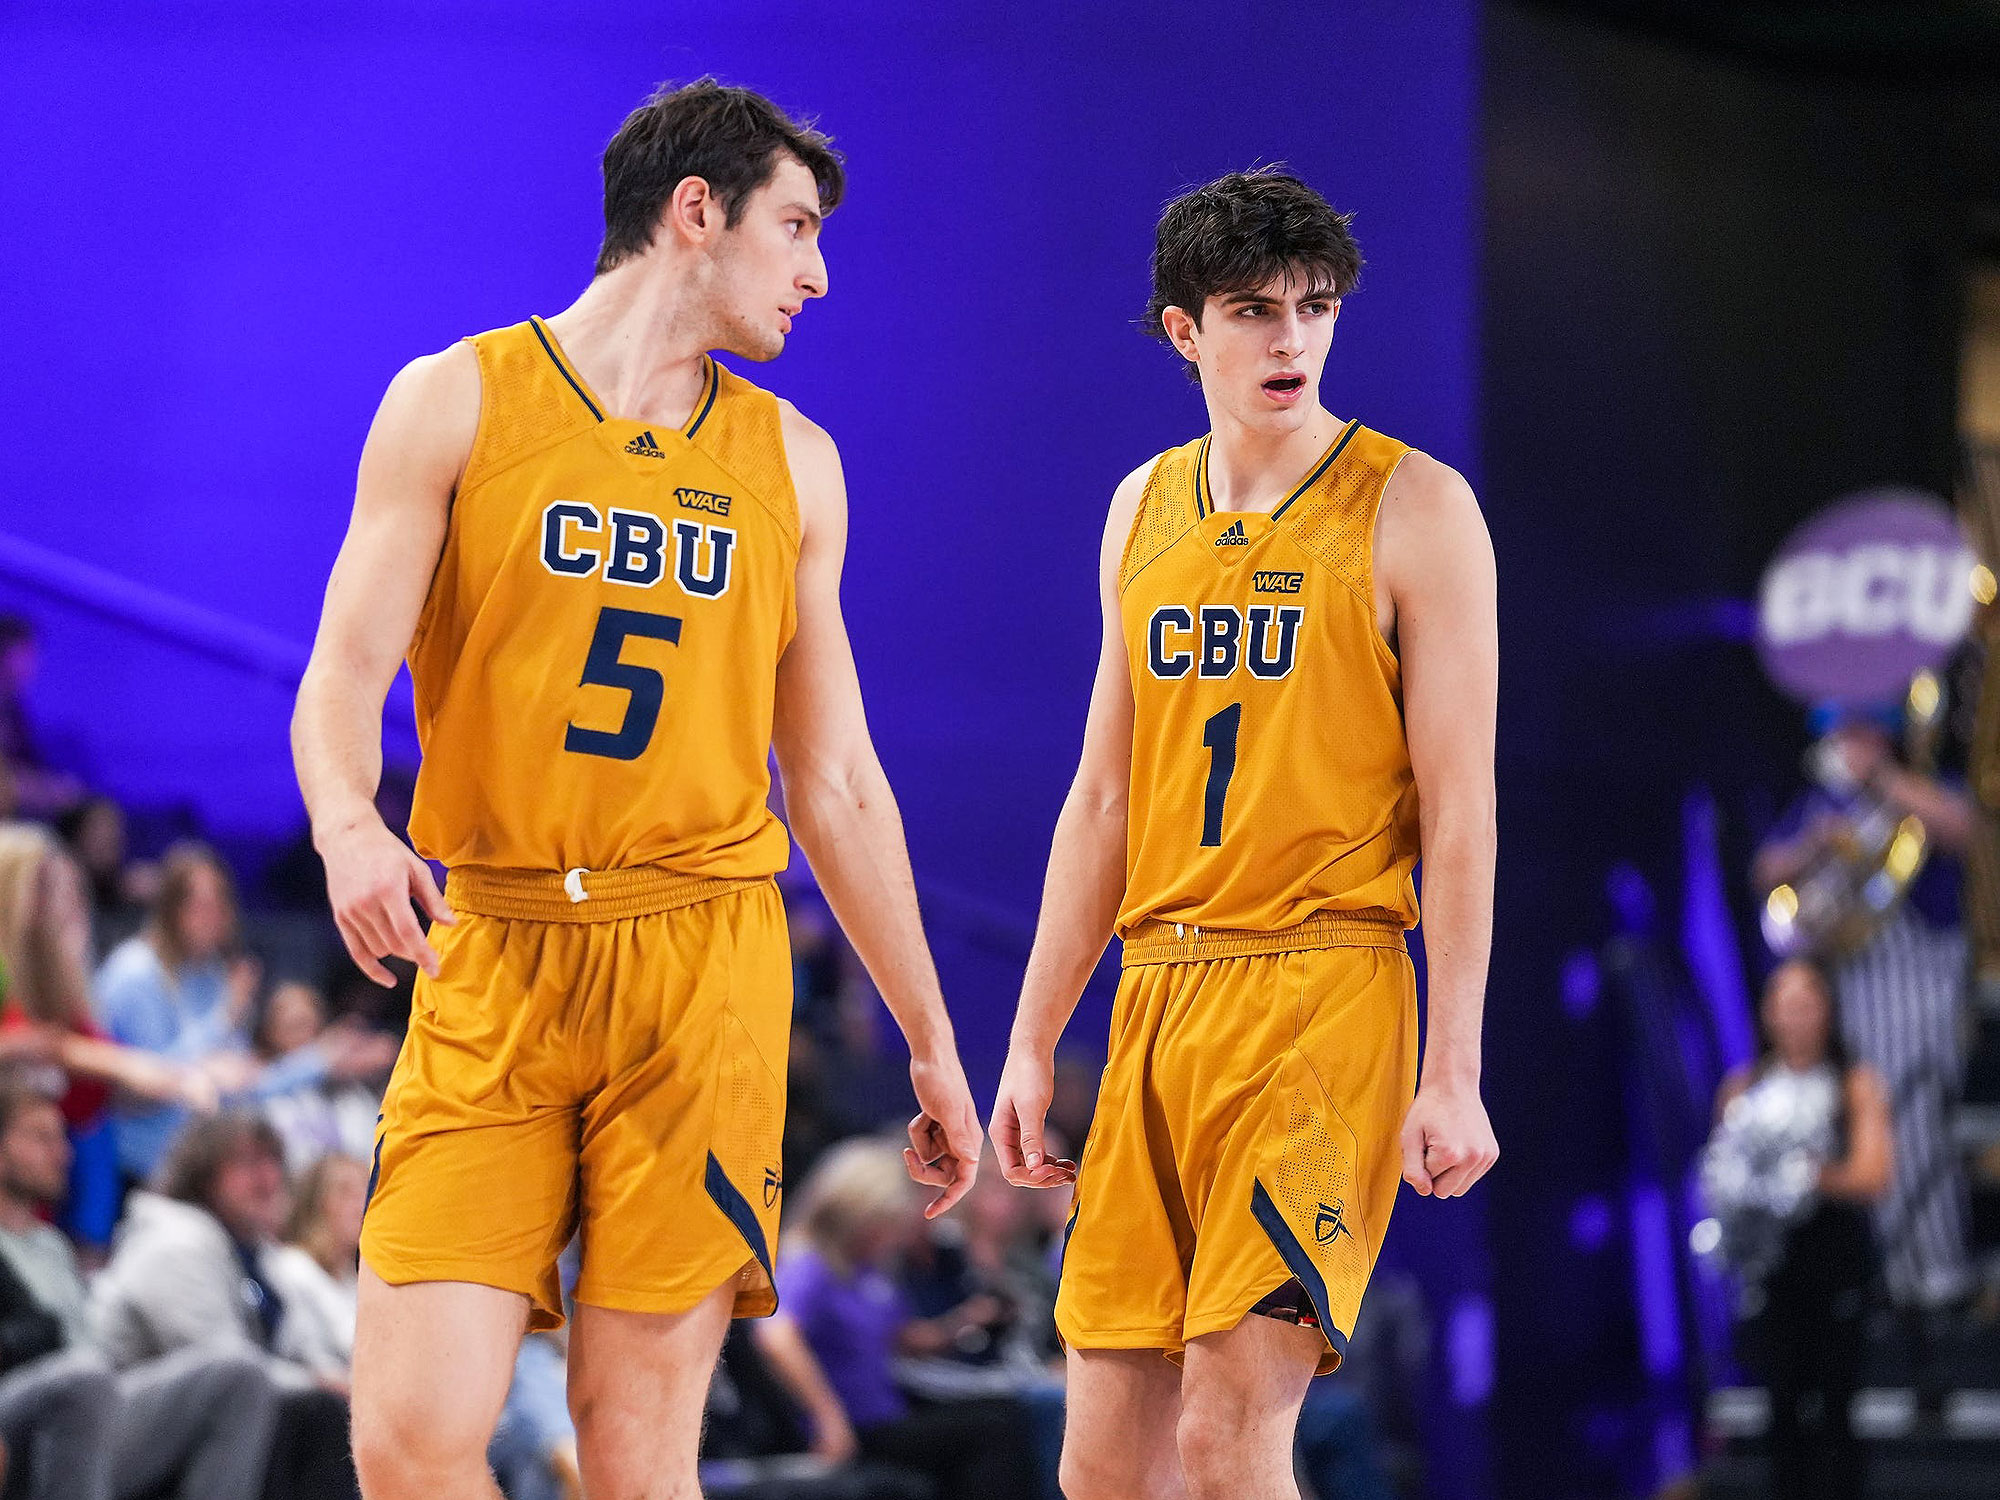 California Baptist’s Reed Nottage and Taran Armstrong walk on the court